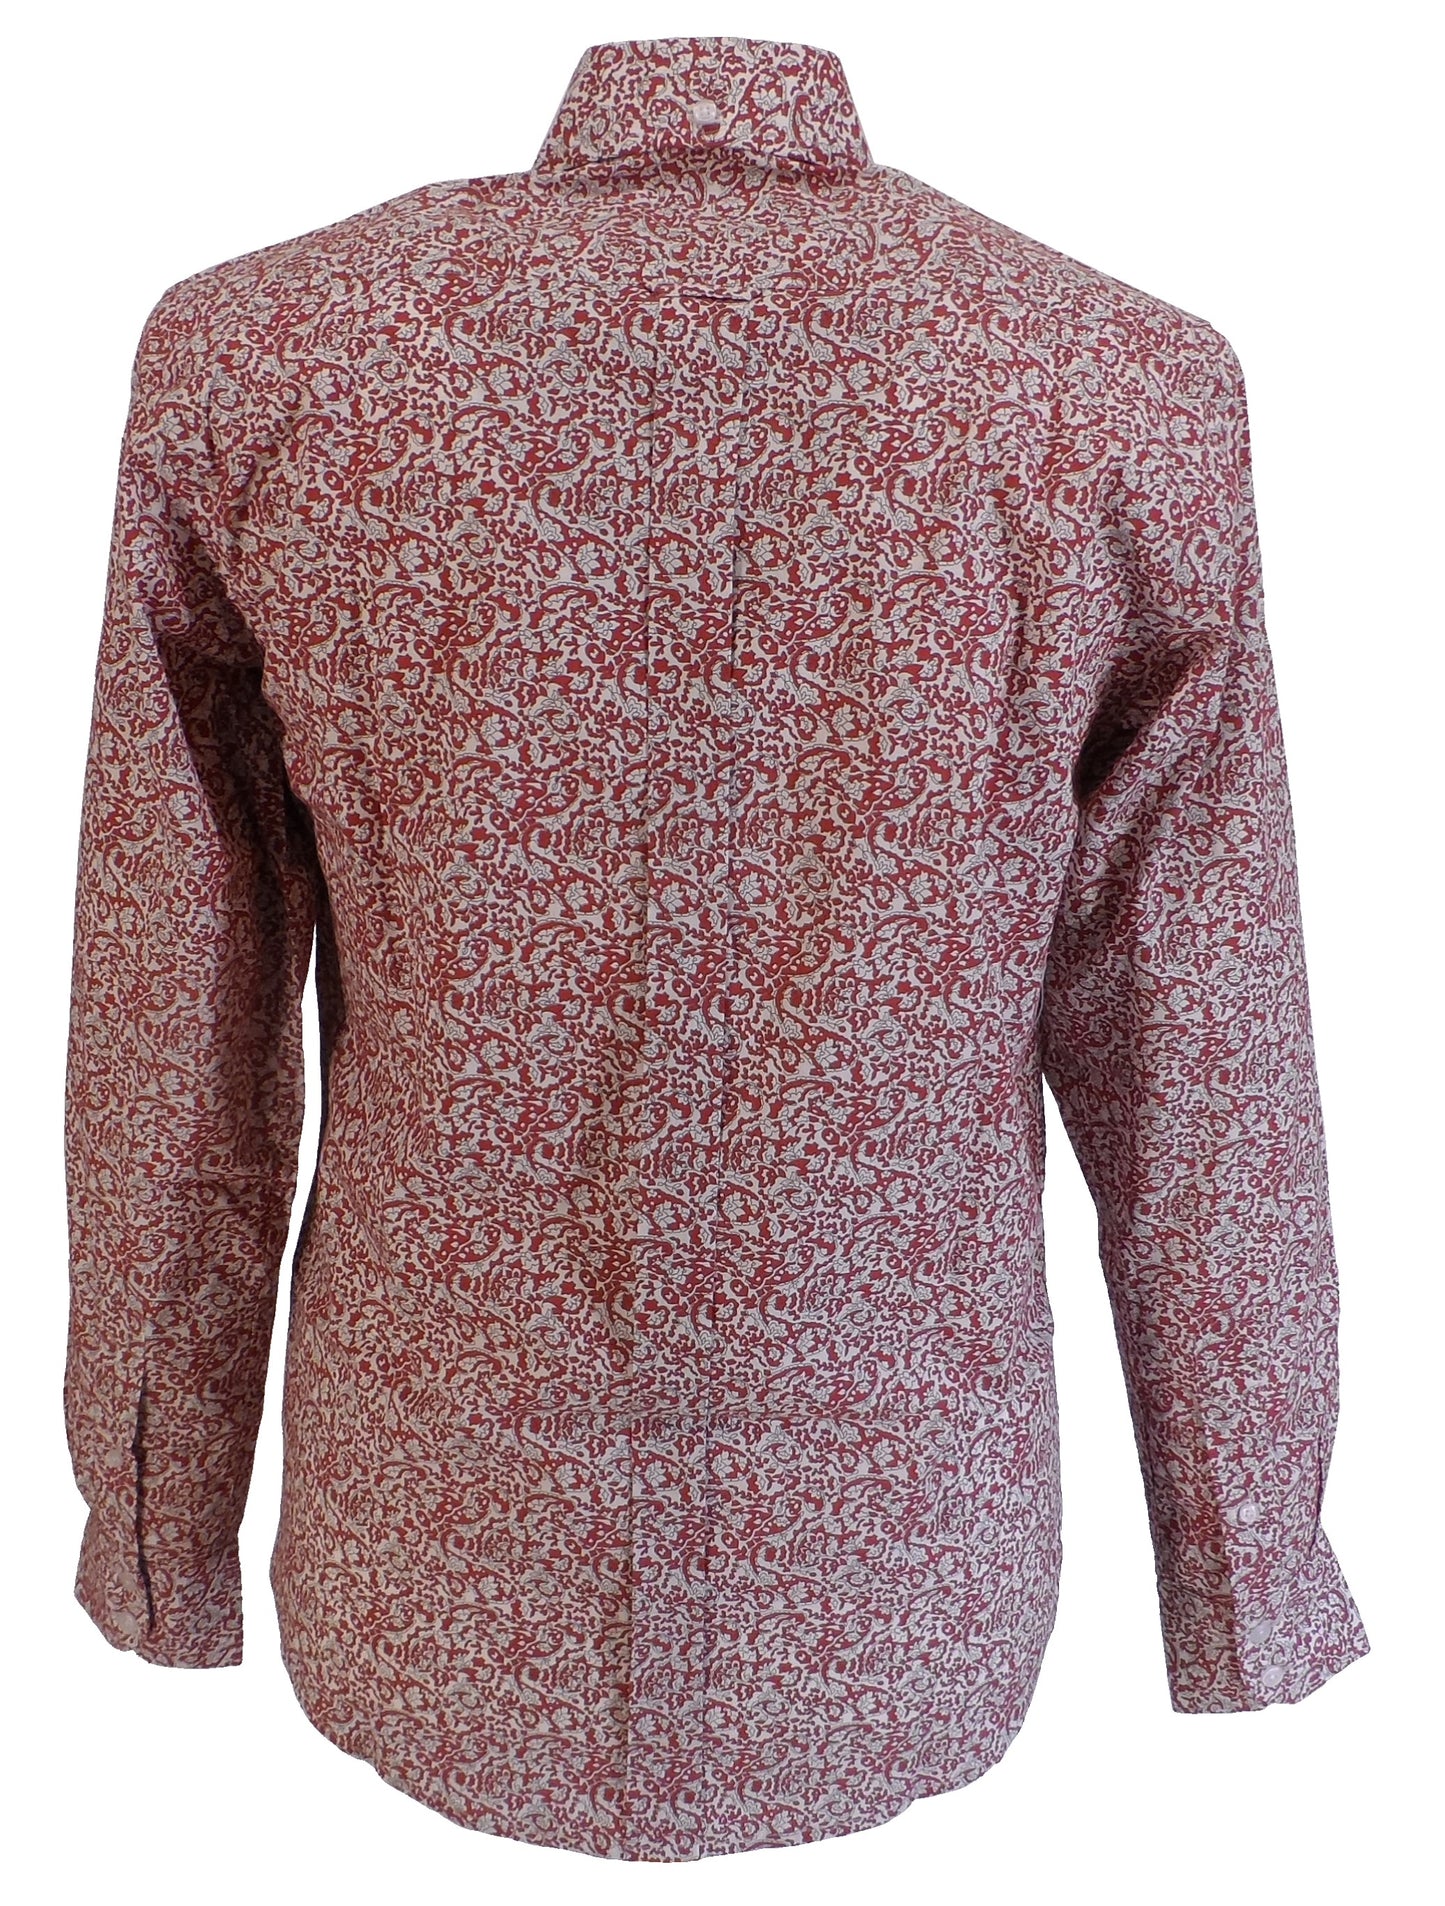 Relco Burgundy Paisley 100% Cotton Long Sleeved Button Down Shirts